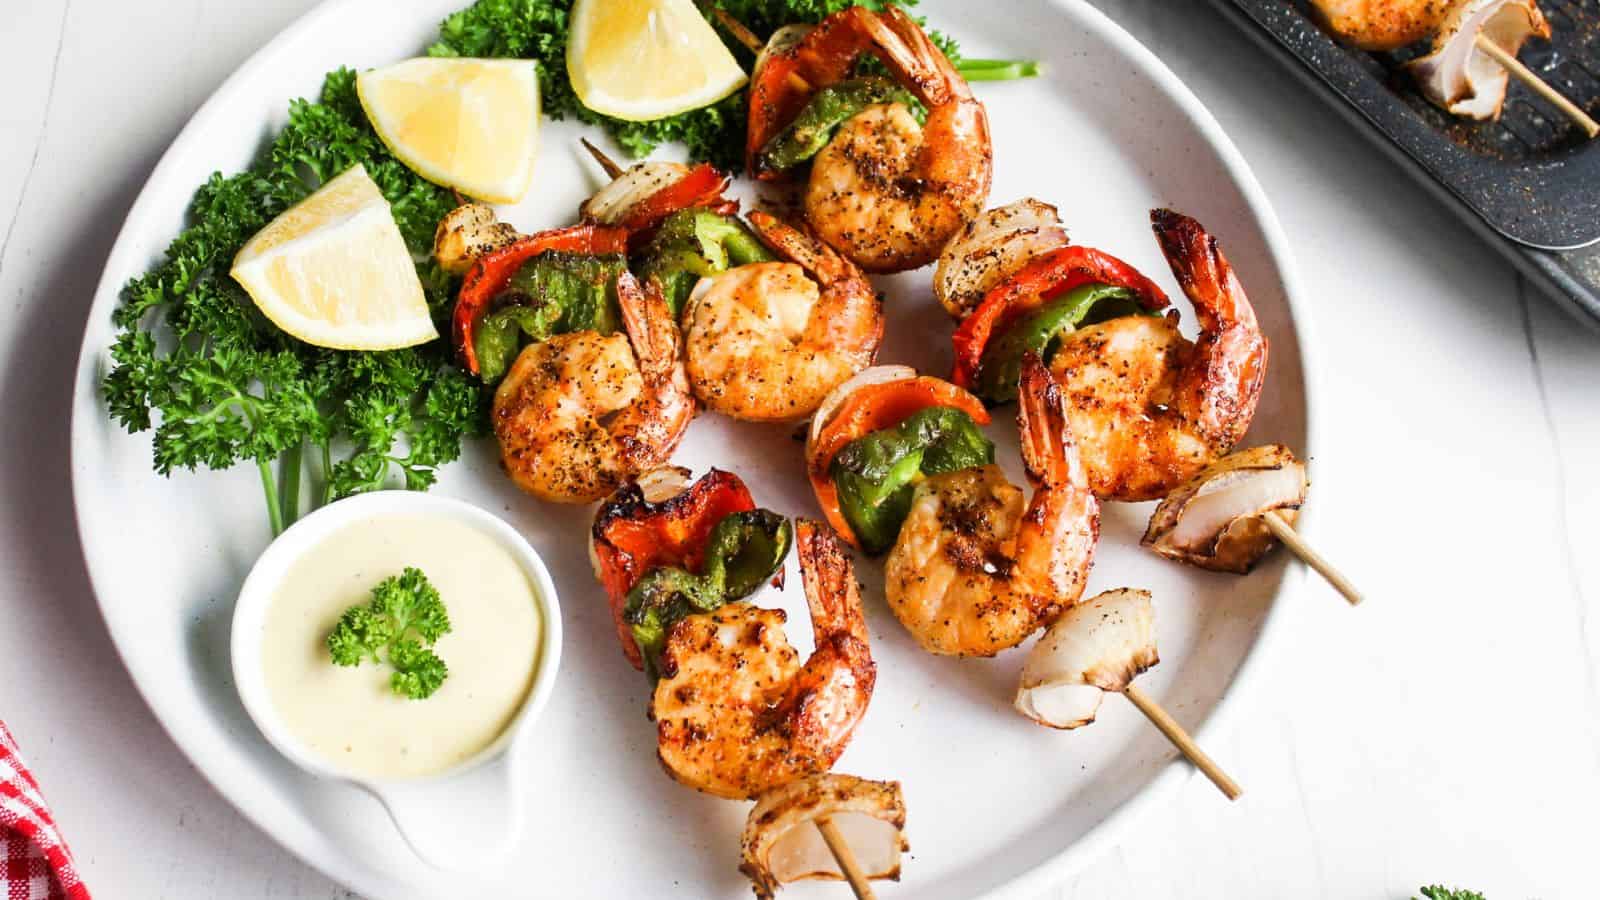 Grilled shrimp skewers with red and green bell peppers, served with lemon wedges and a dipping sauce on a white plate.